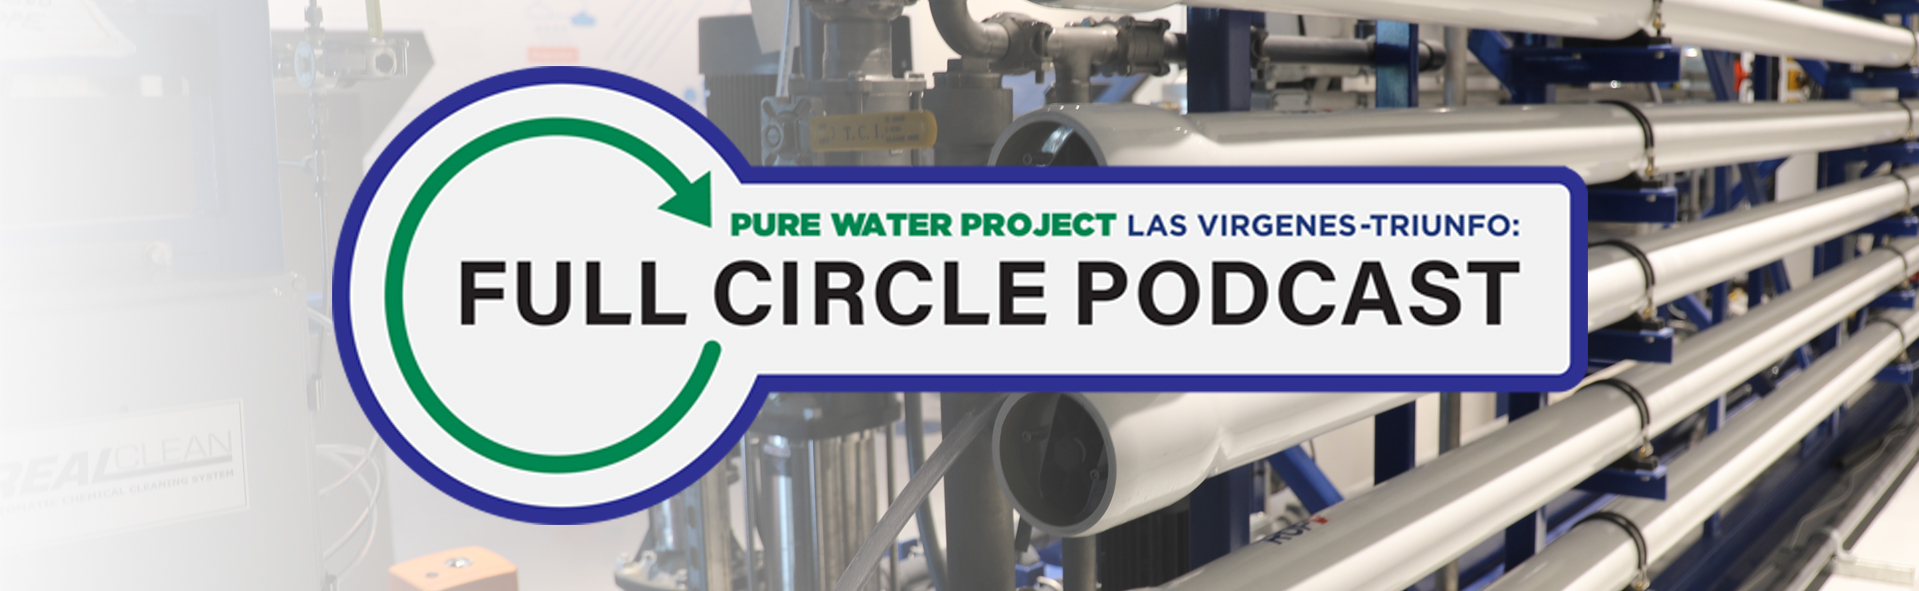 Full Circle Podcast with RO tubes in background